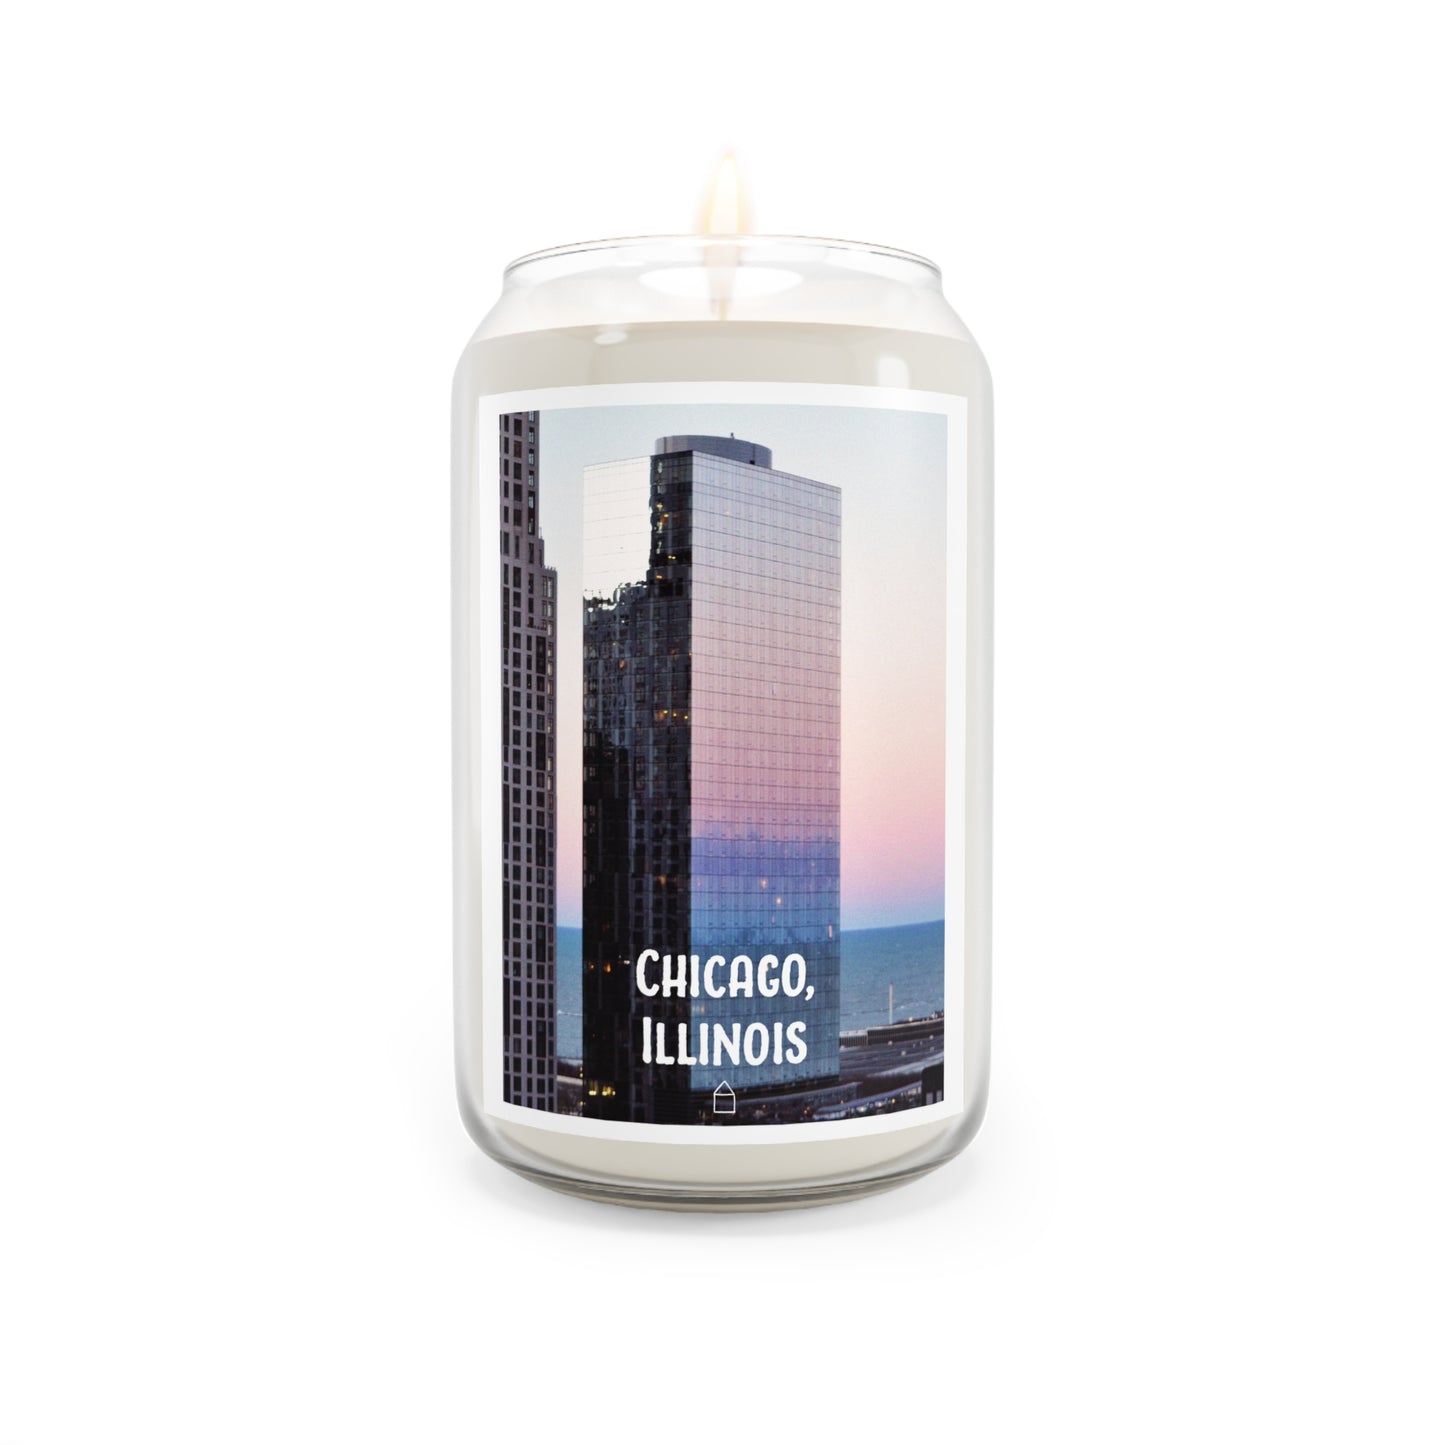 Chicago, Illinois (#023) - Home Town Candles, 13.75oz